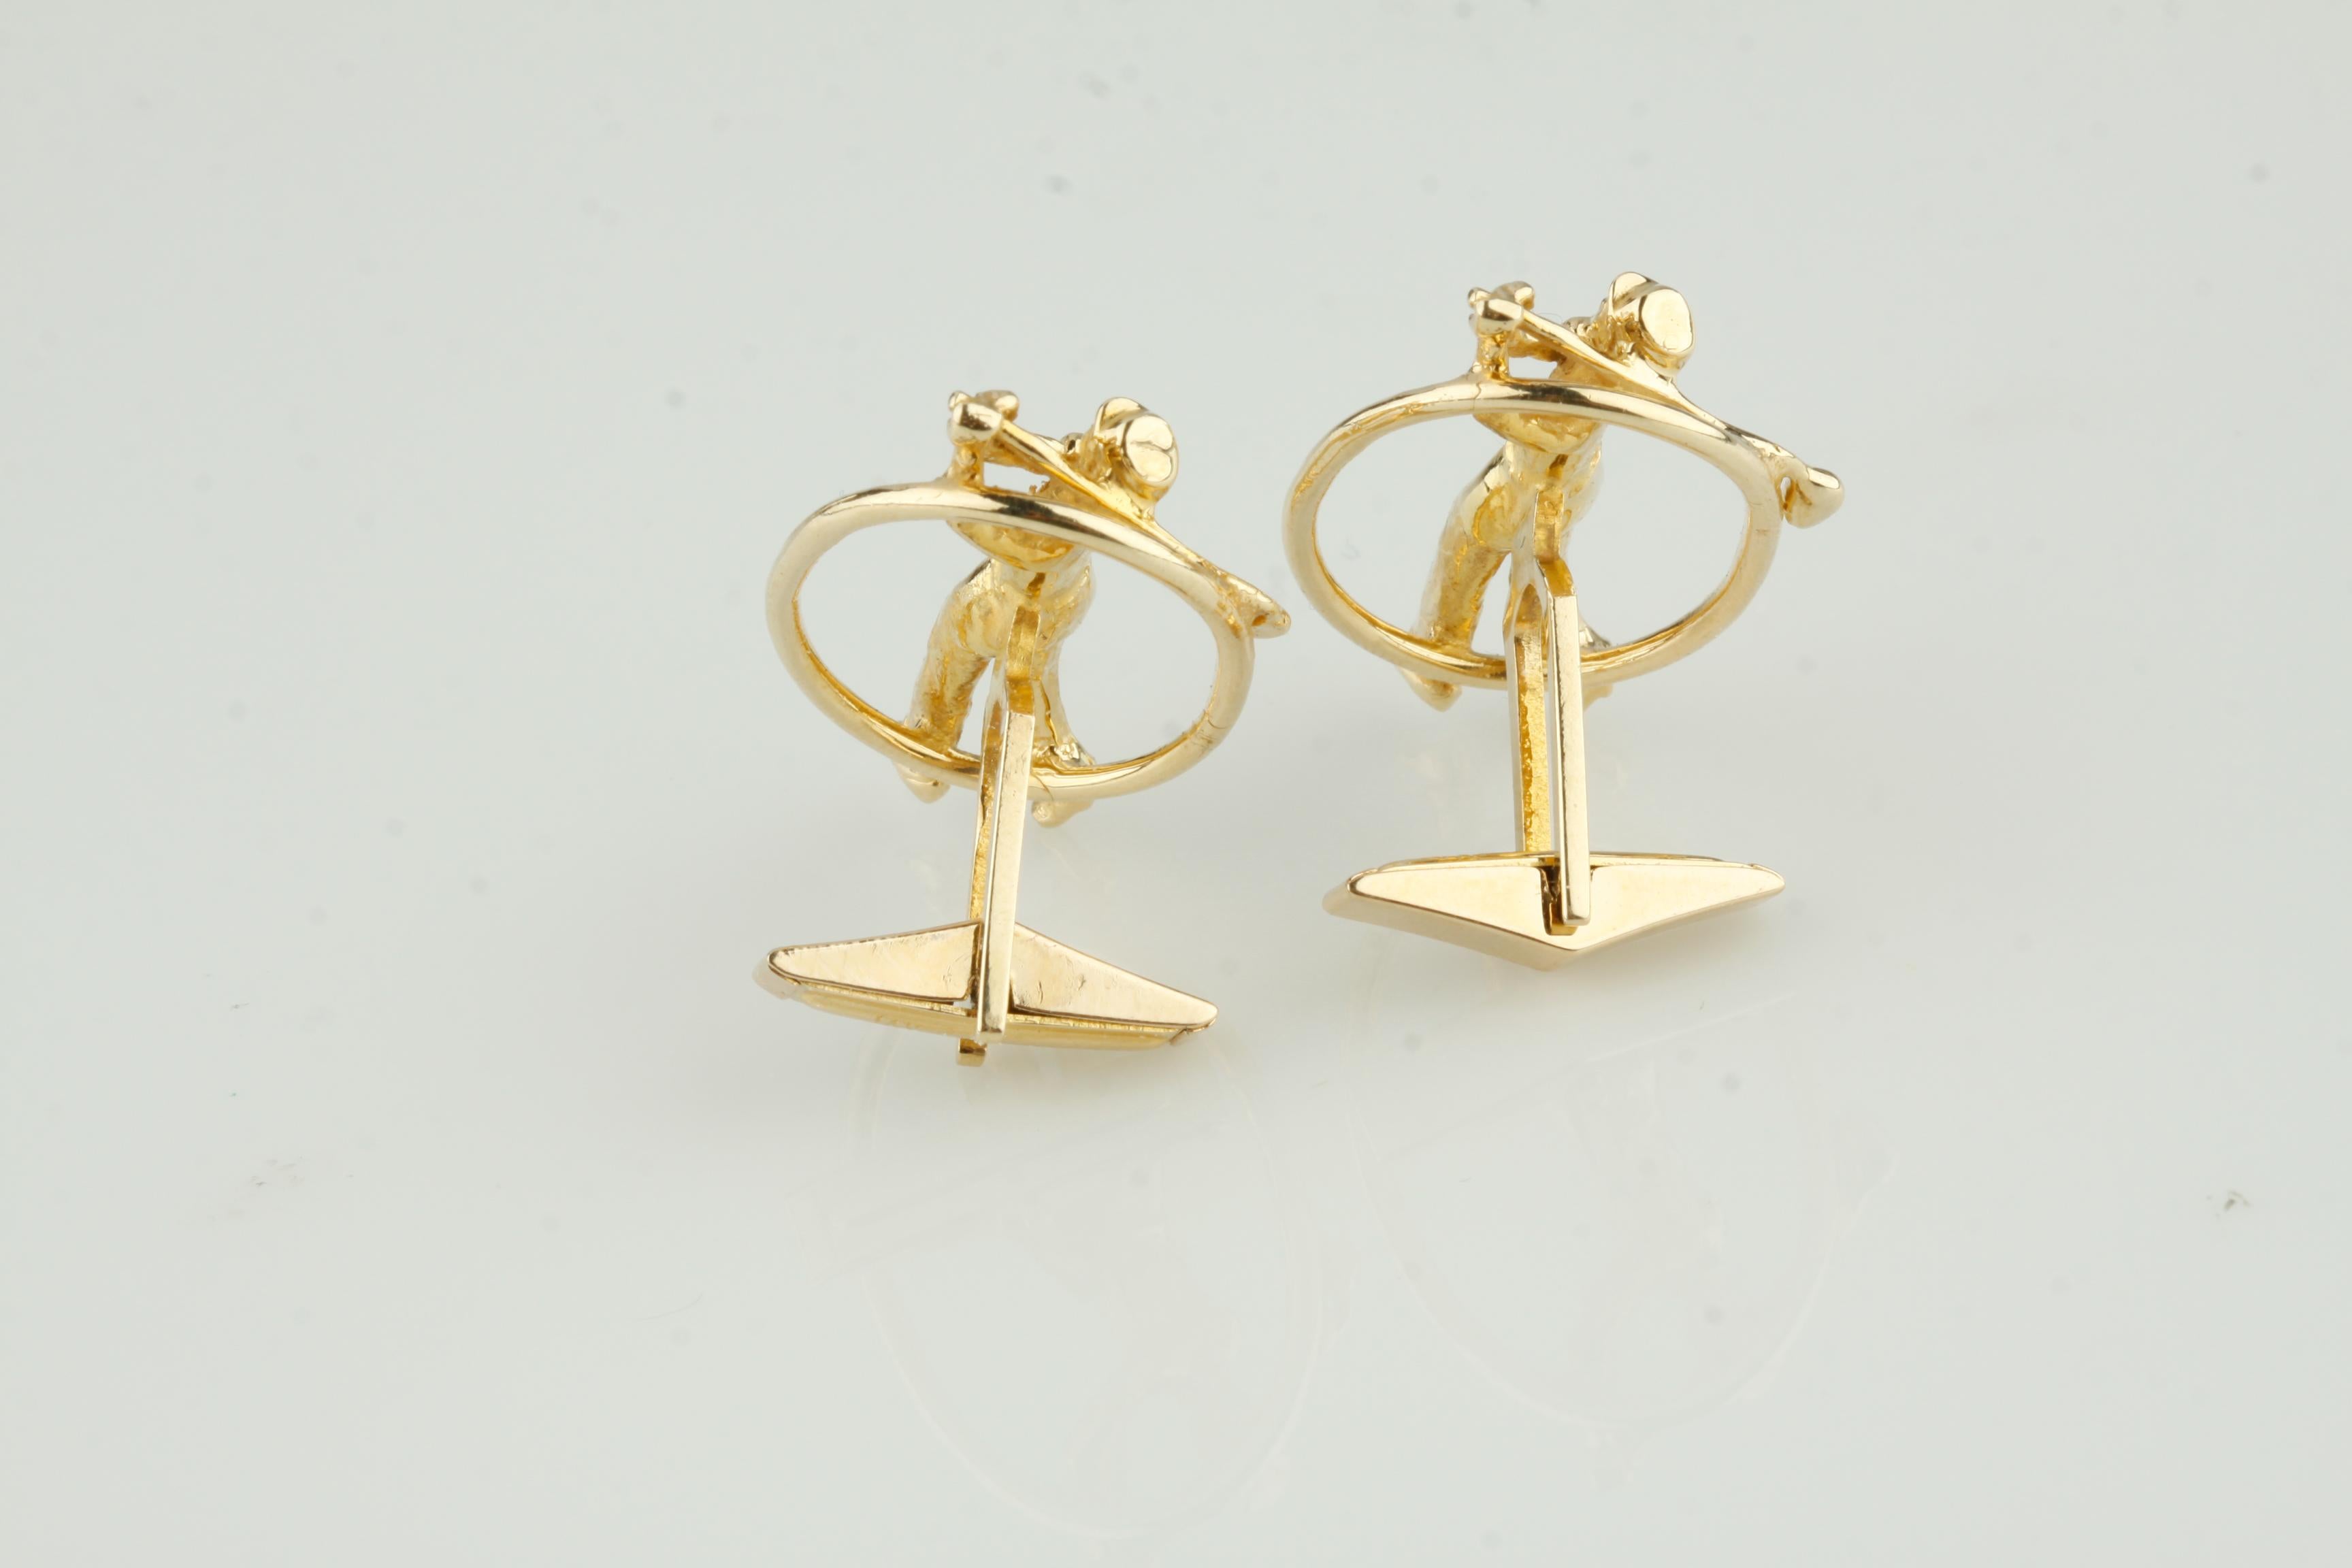 Unique cufflinks for any Golf enthusiast
Design: Golf Player swinging club with halo around player 
14K Yellow gold 
14.1 grams 